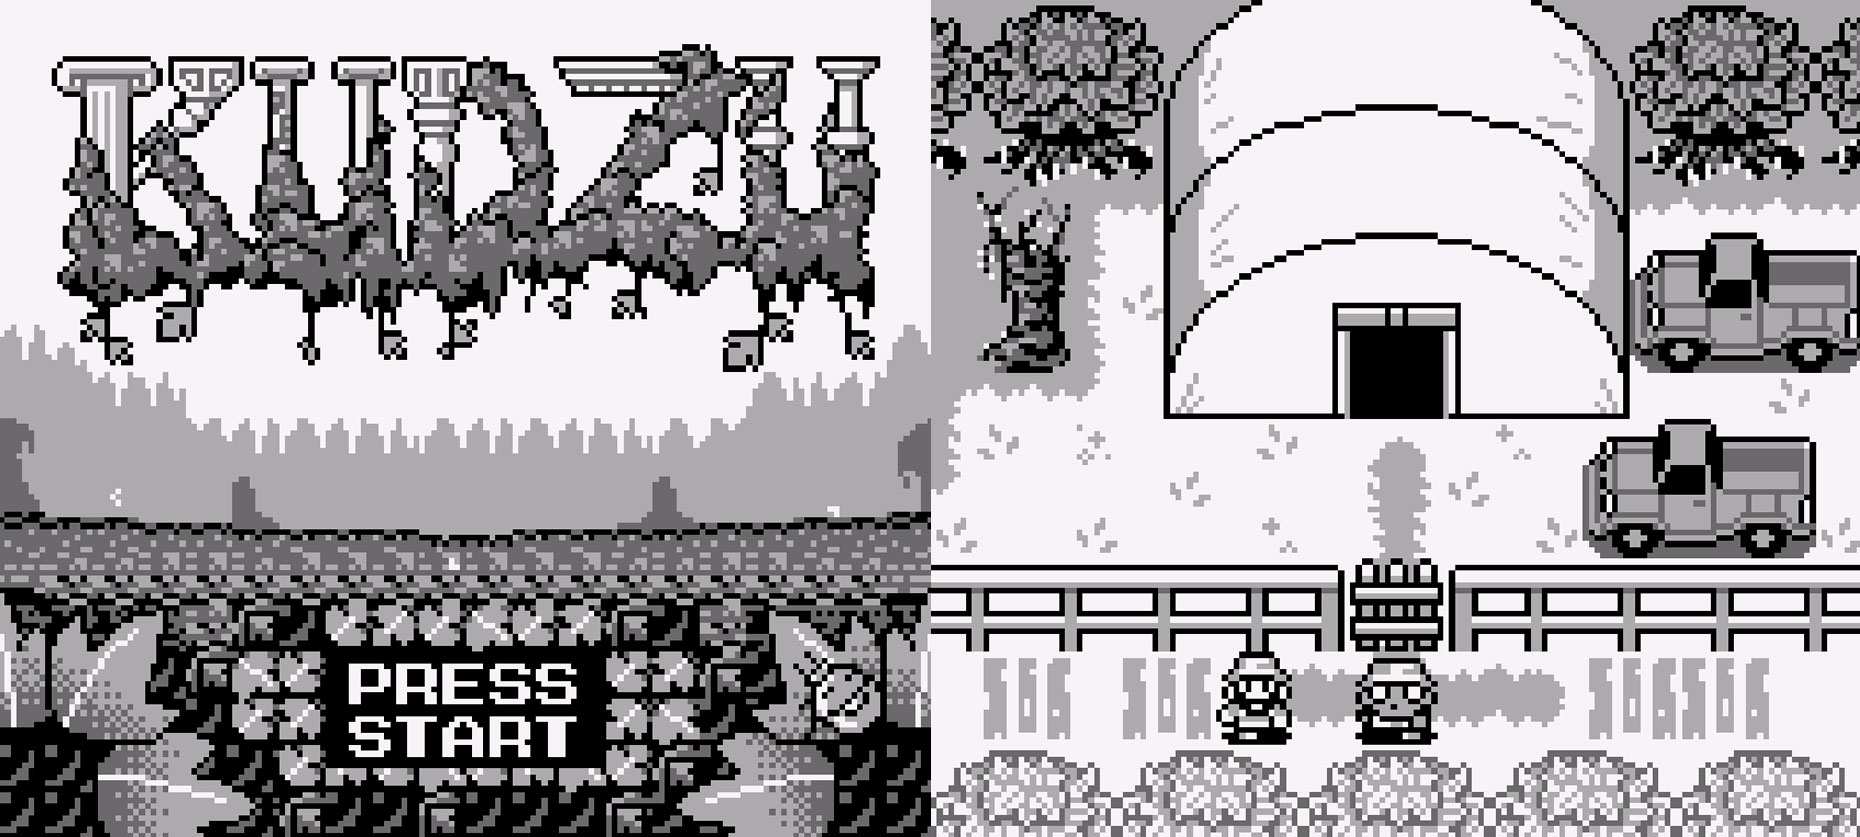 The title screen and a gameplay image from the new Game Boy game Kudzu.